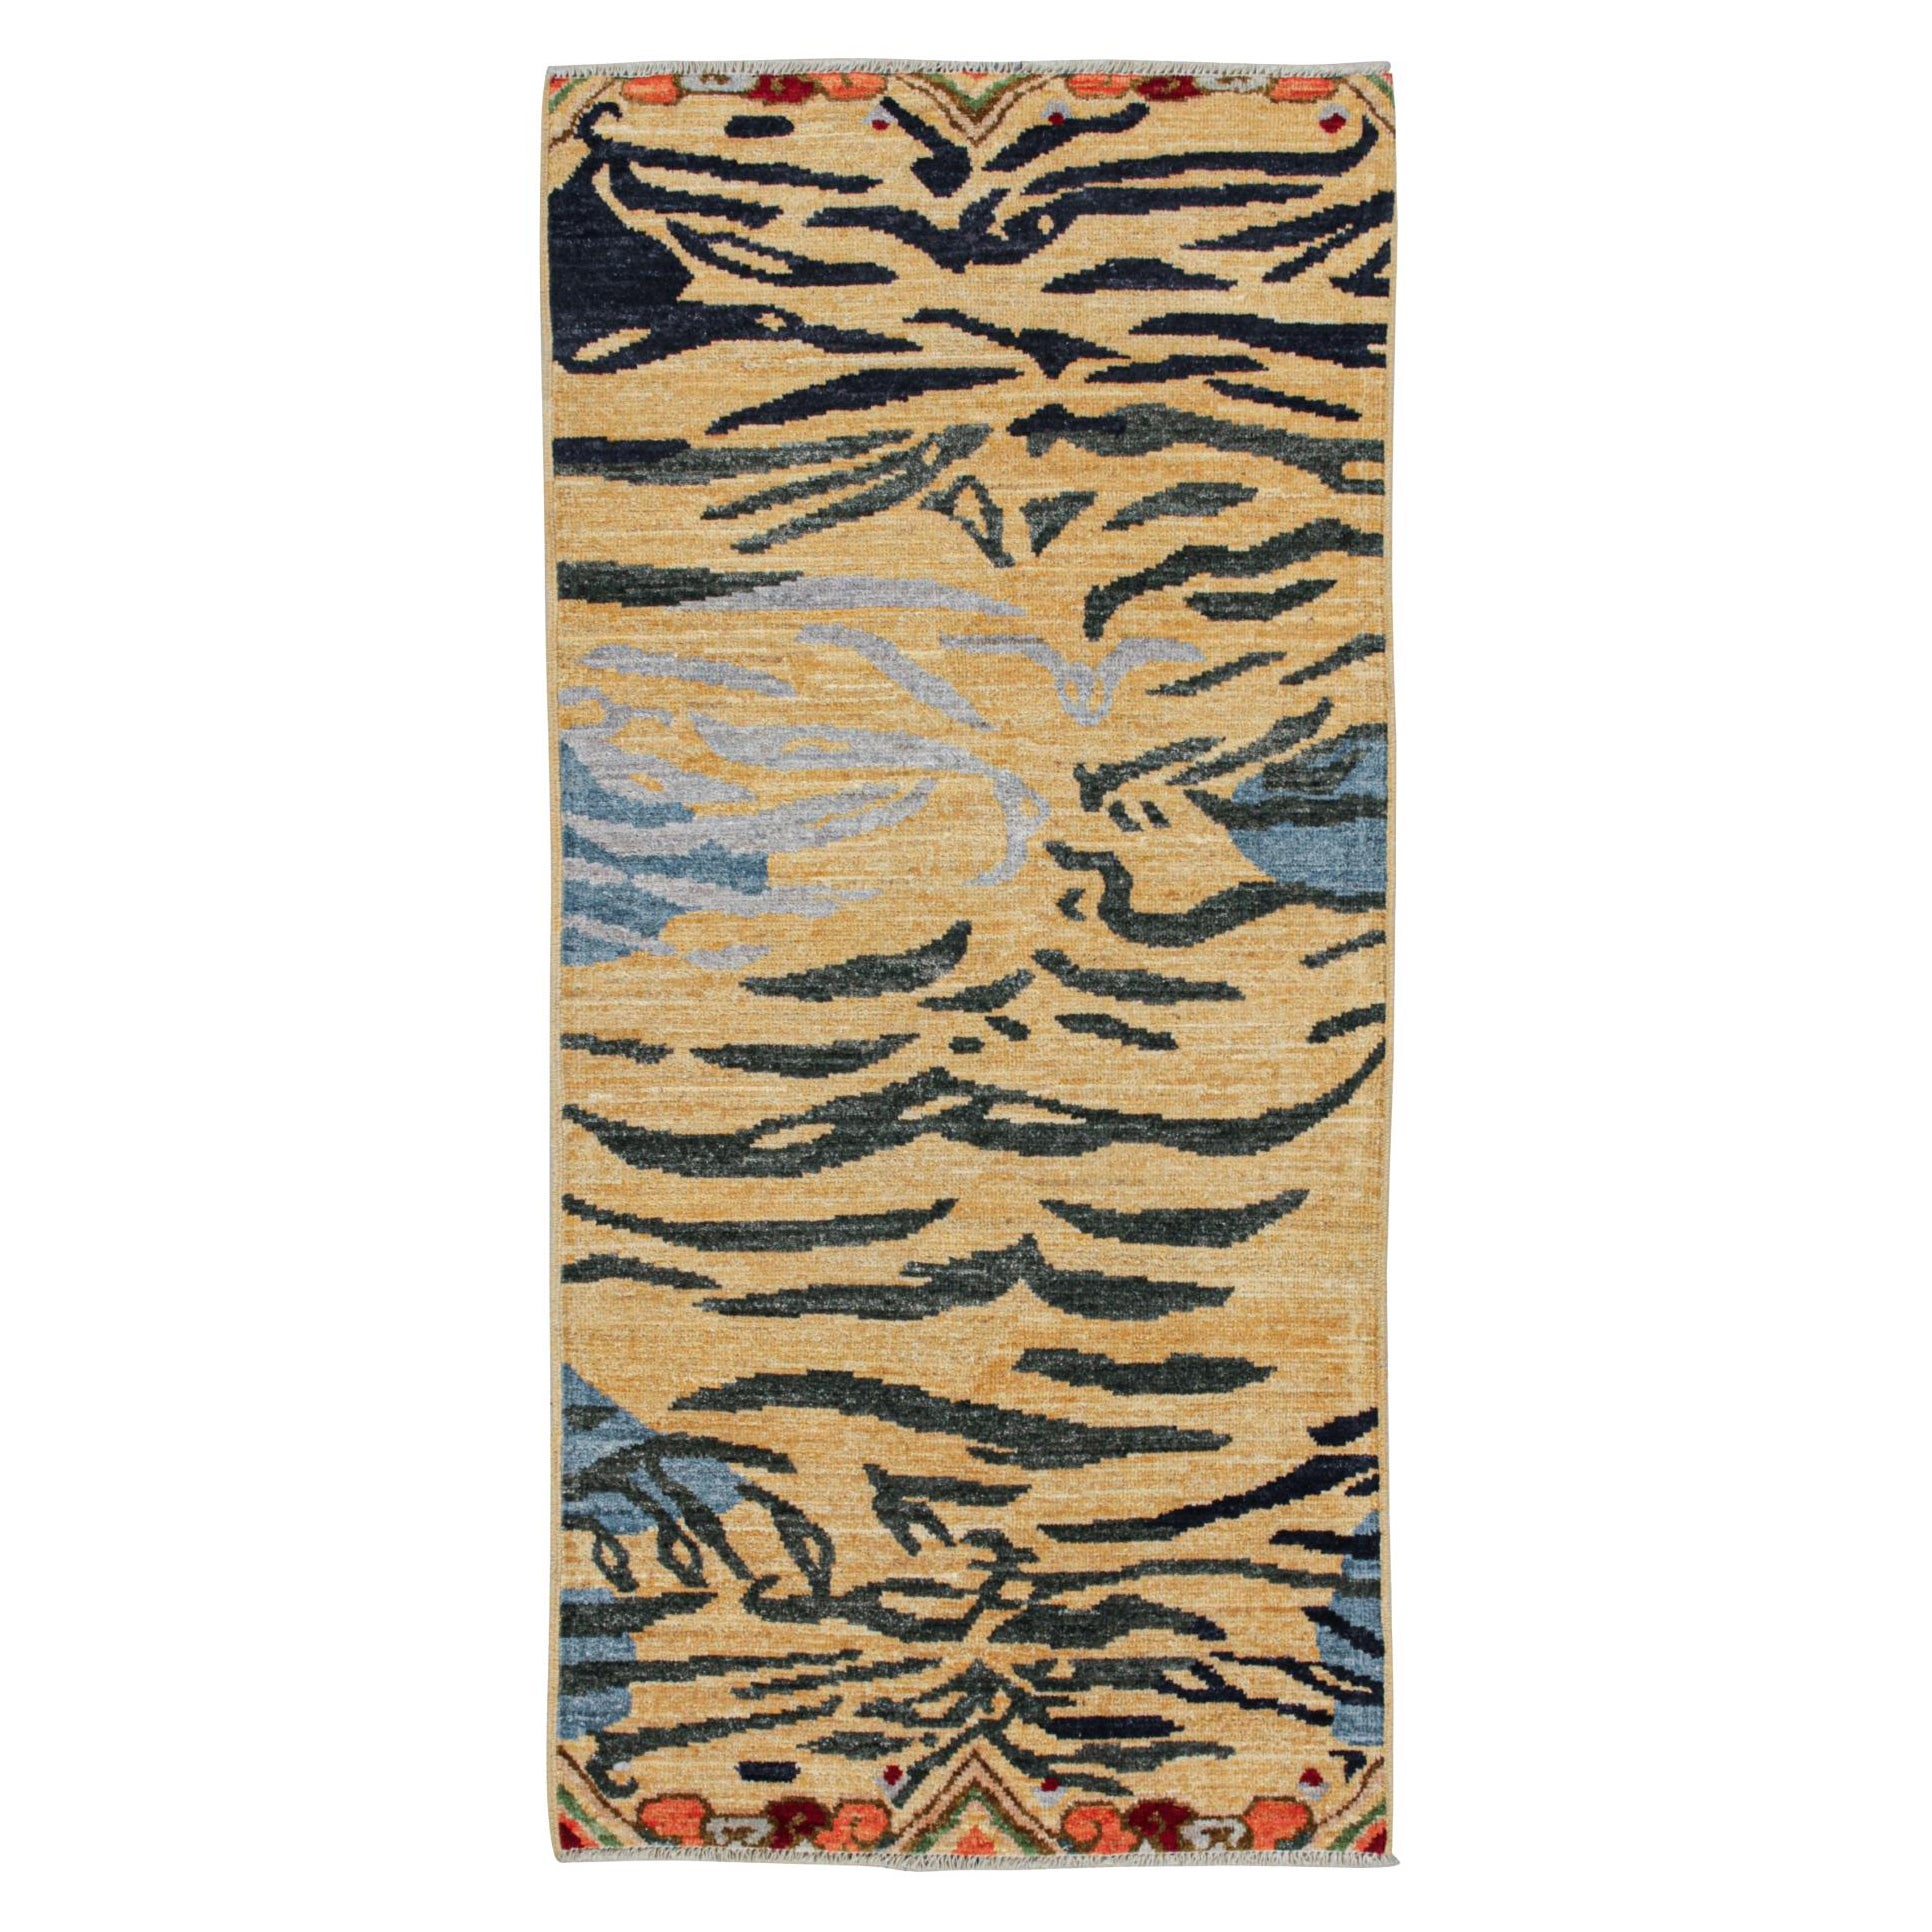 Tapis & Kilim's Classic Style Tiger-Skin Runner in Gold with Gray and Blue Stripes (Tapis & Kilim's Classic Style Tiger-Skin Runner in Gold with Gray and Blue Stripes) en vente